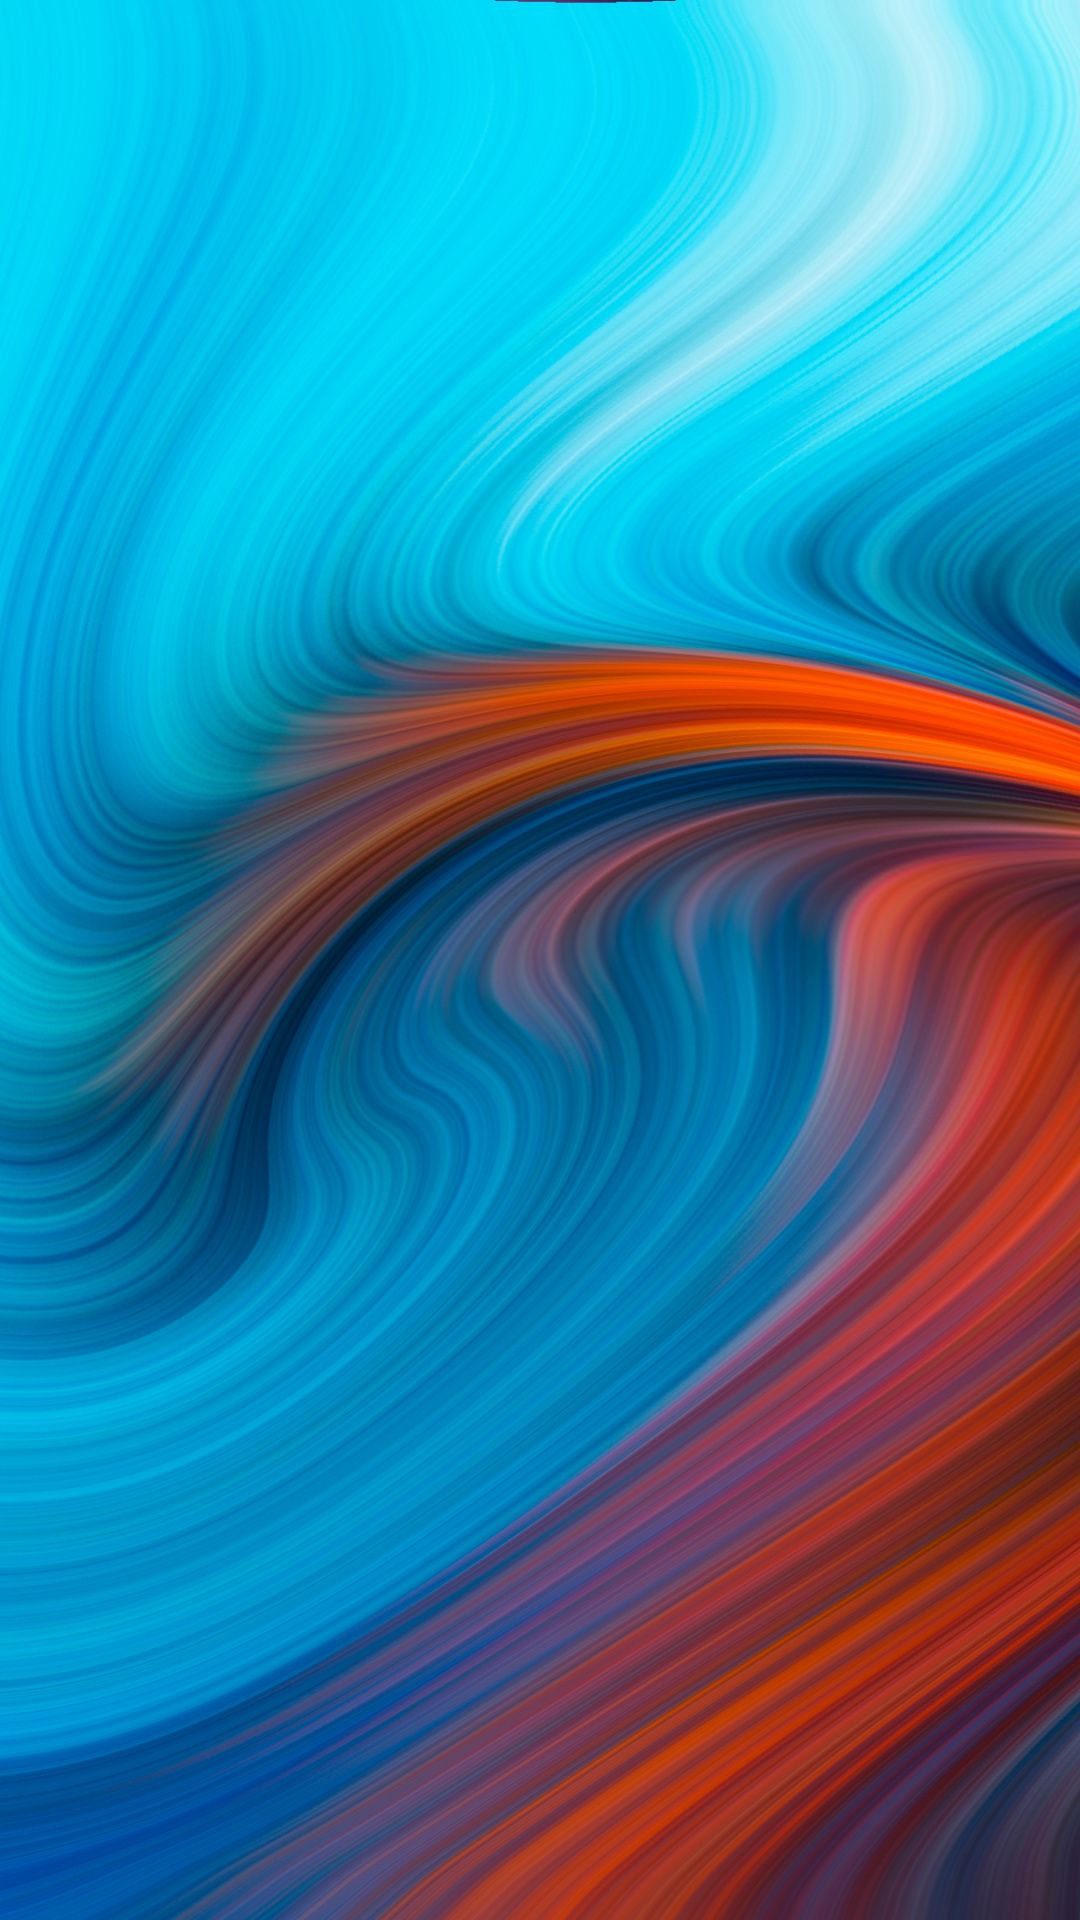 1080x1920 Blue orange swirl, pattern, abstraction wallpaper | Android wallpaper nature, Best nature wallpapers, Abstract